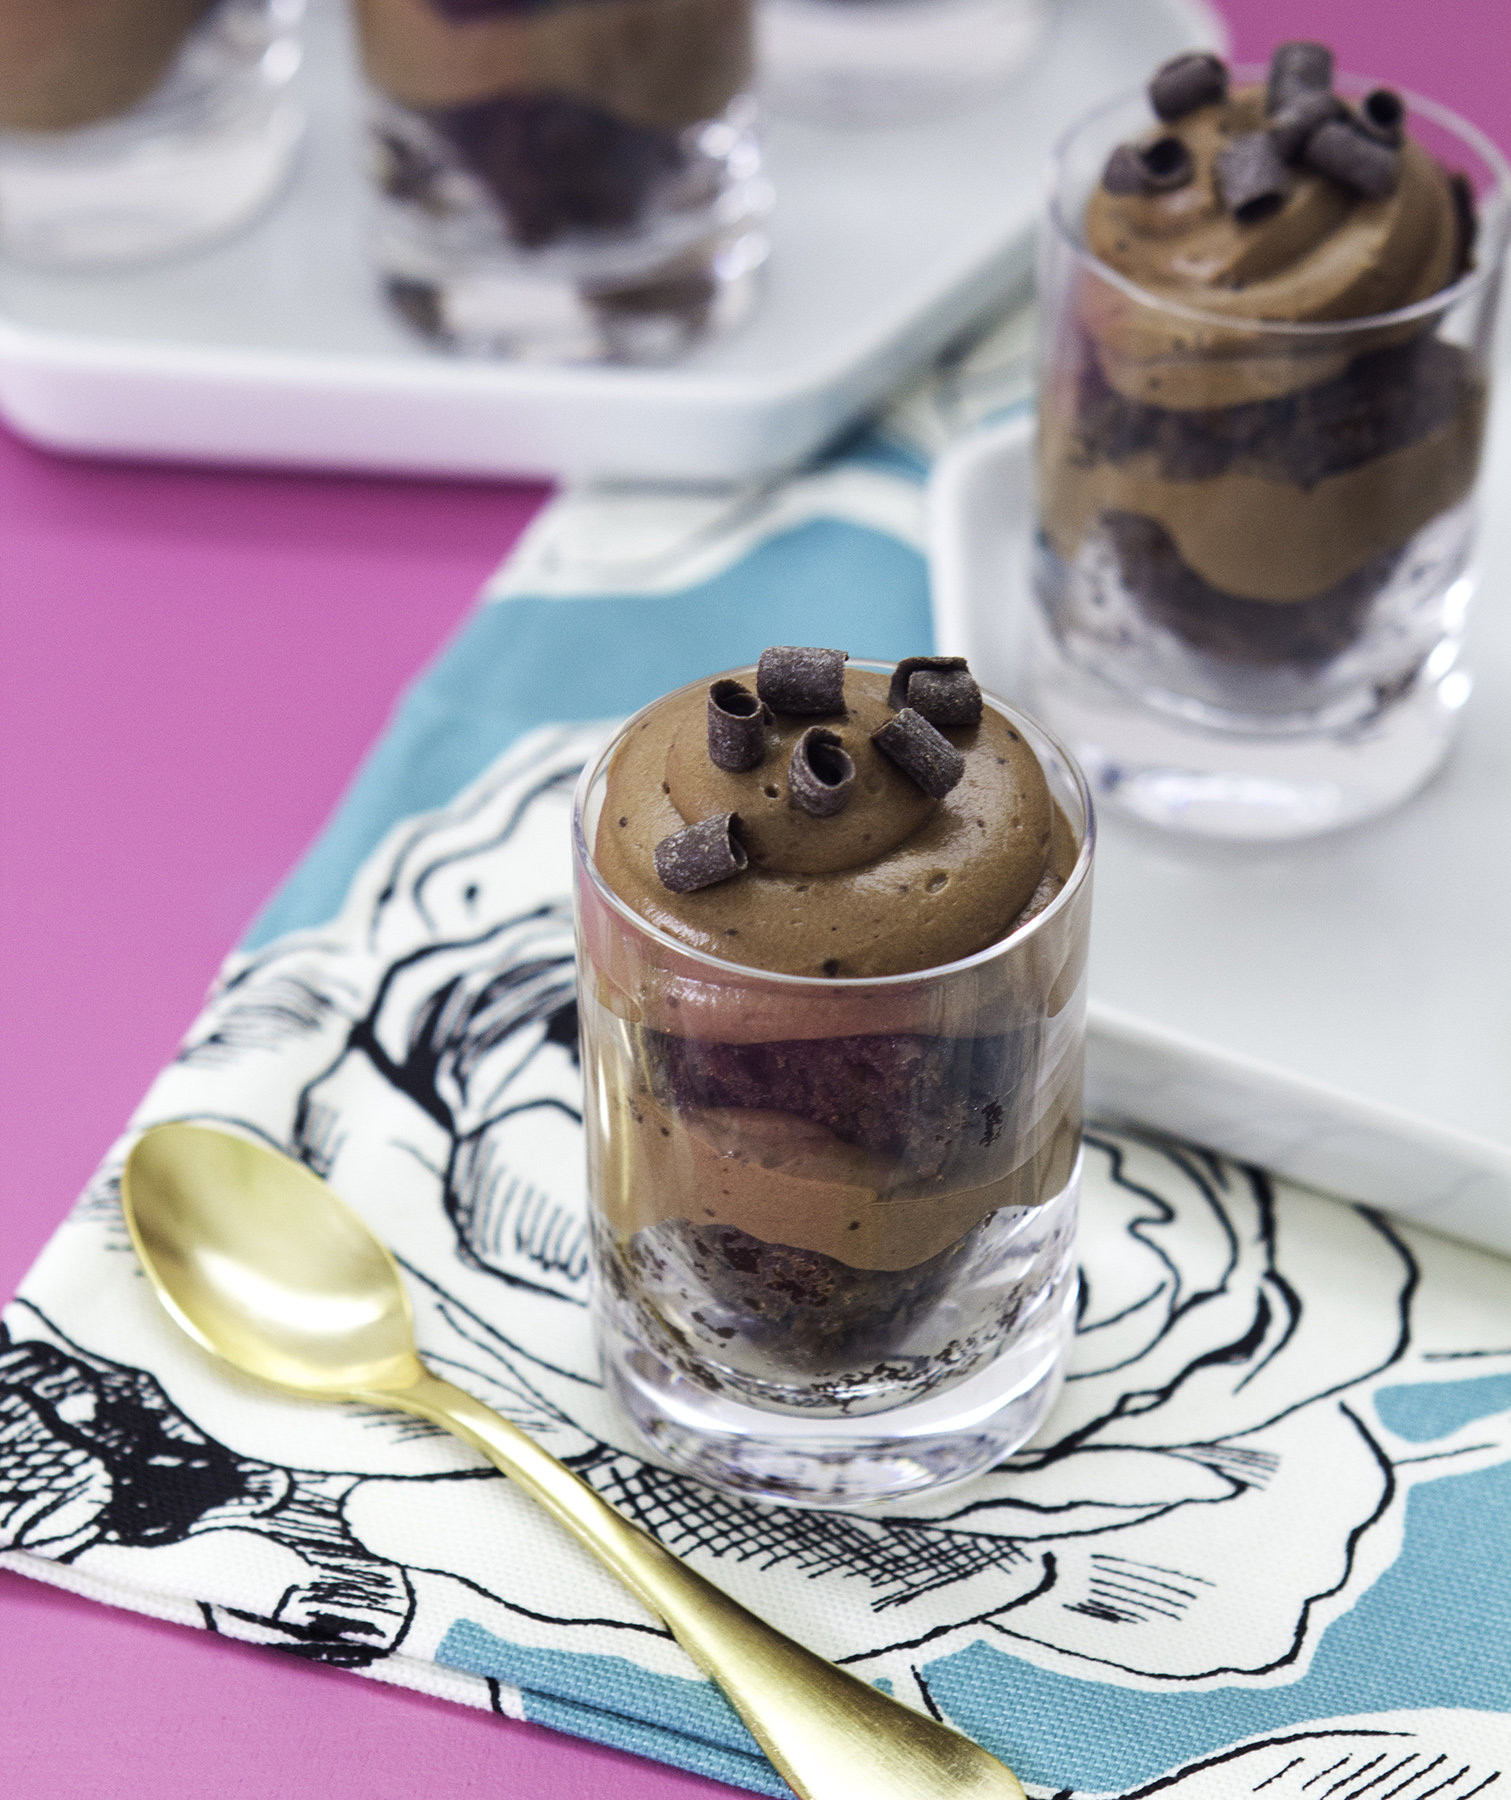 Mini Christmas Desserts
 Chocolate Mousse and Brownie Trifles